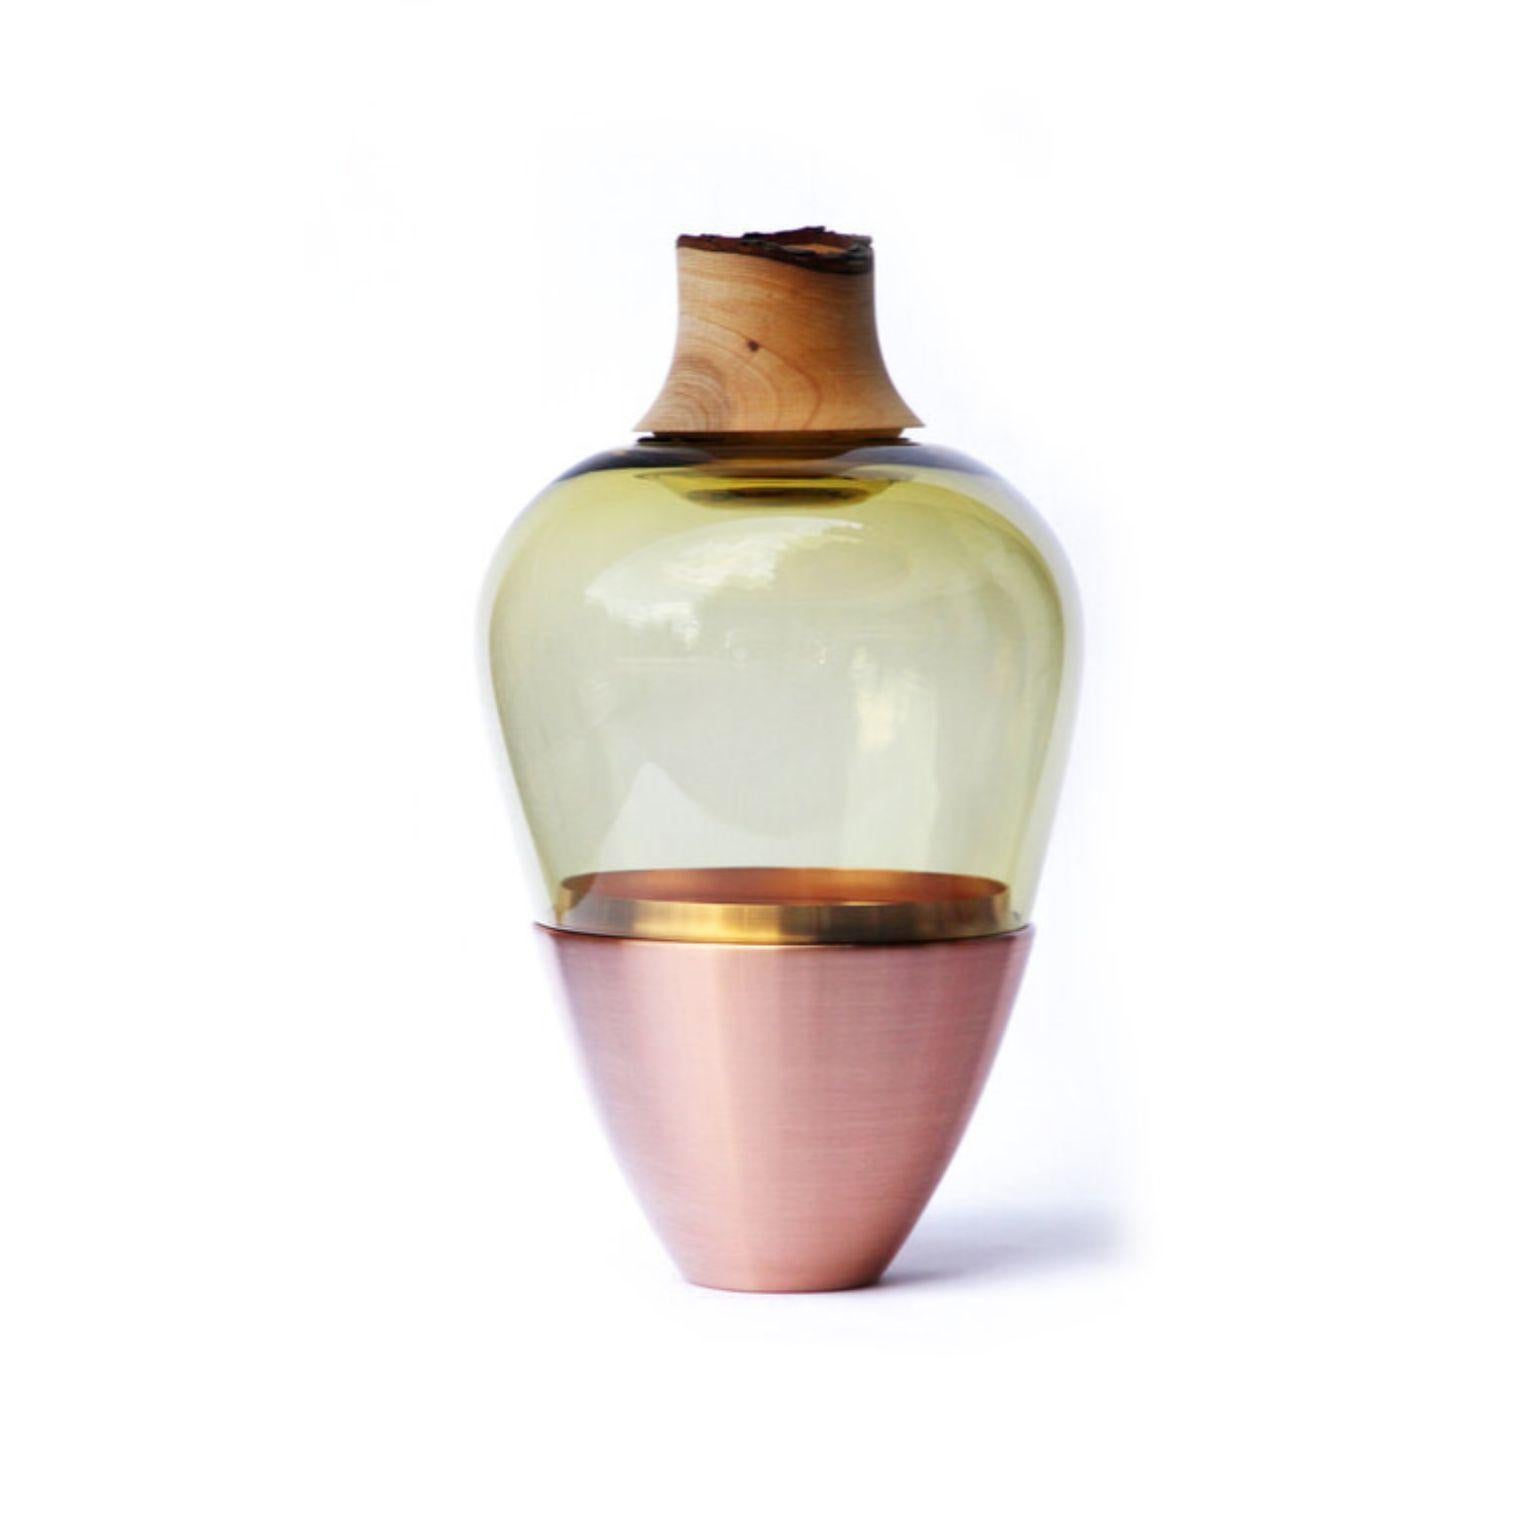 Organic Modern Olive and Brass Sculpted Blown Glass India Stacking Vessel, Pia Wüstenberg For Sale